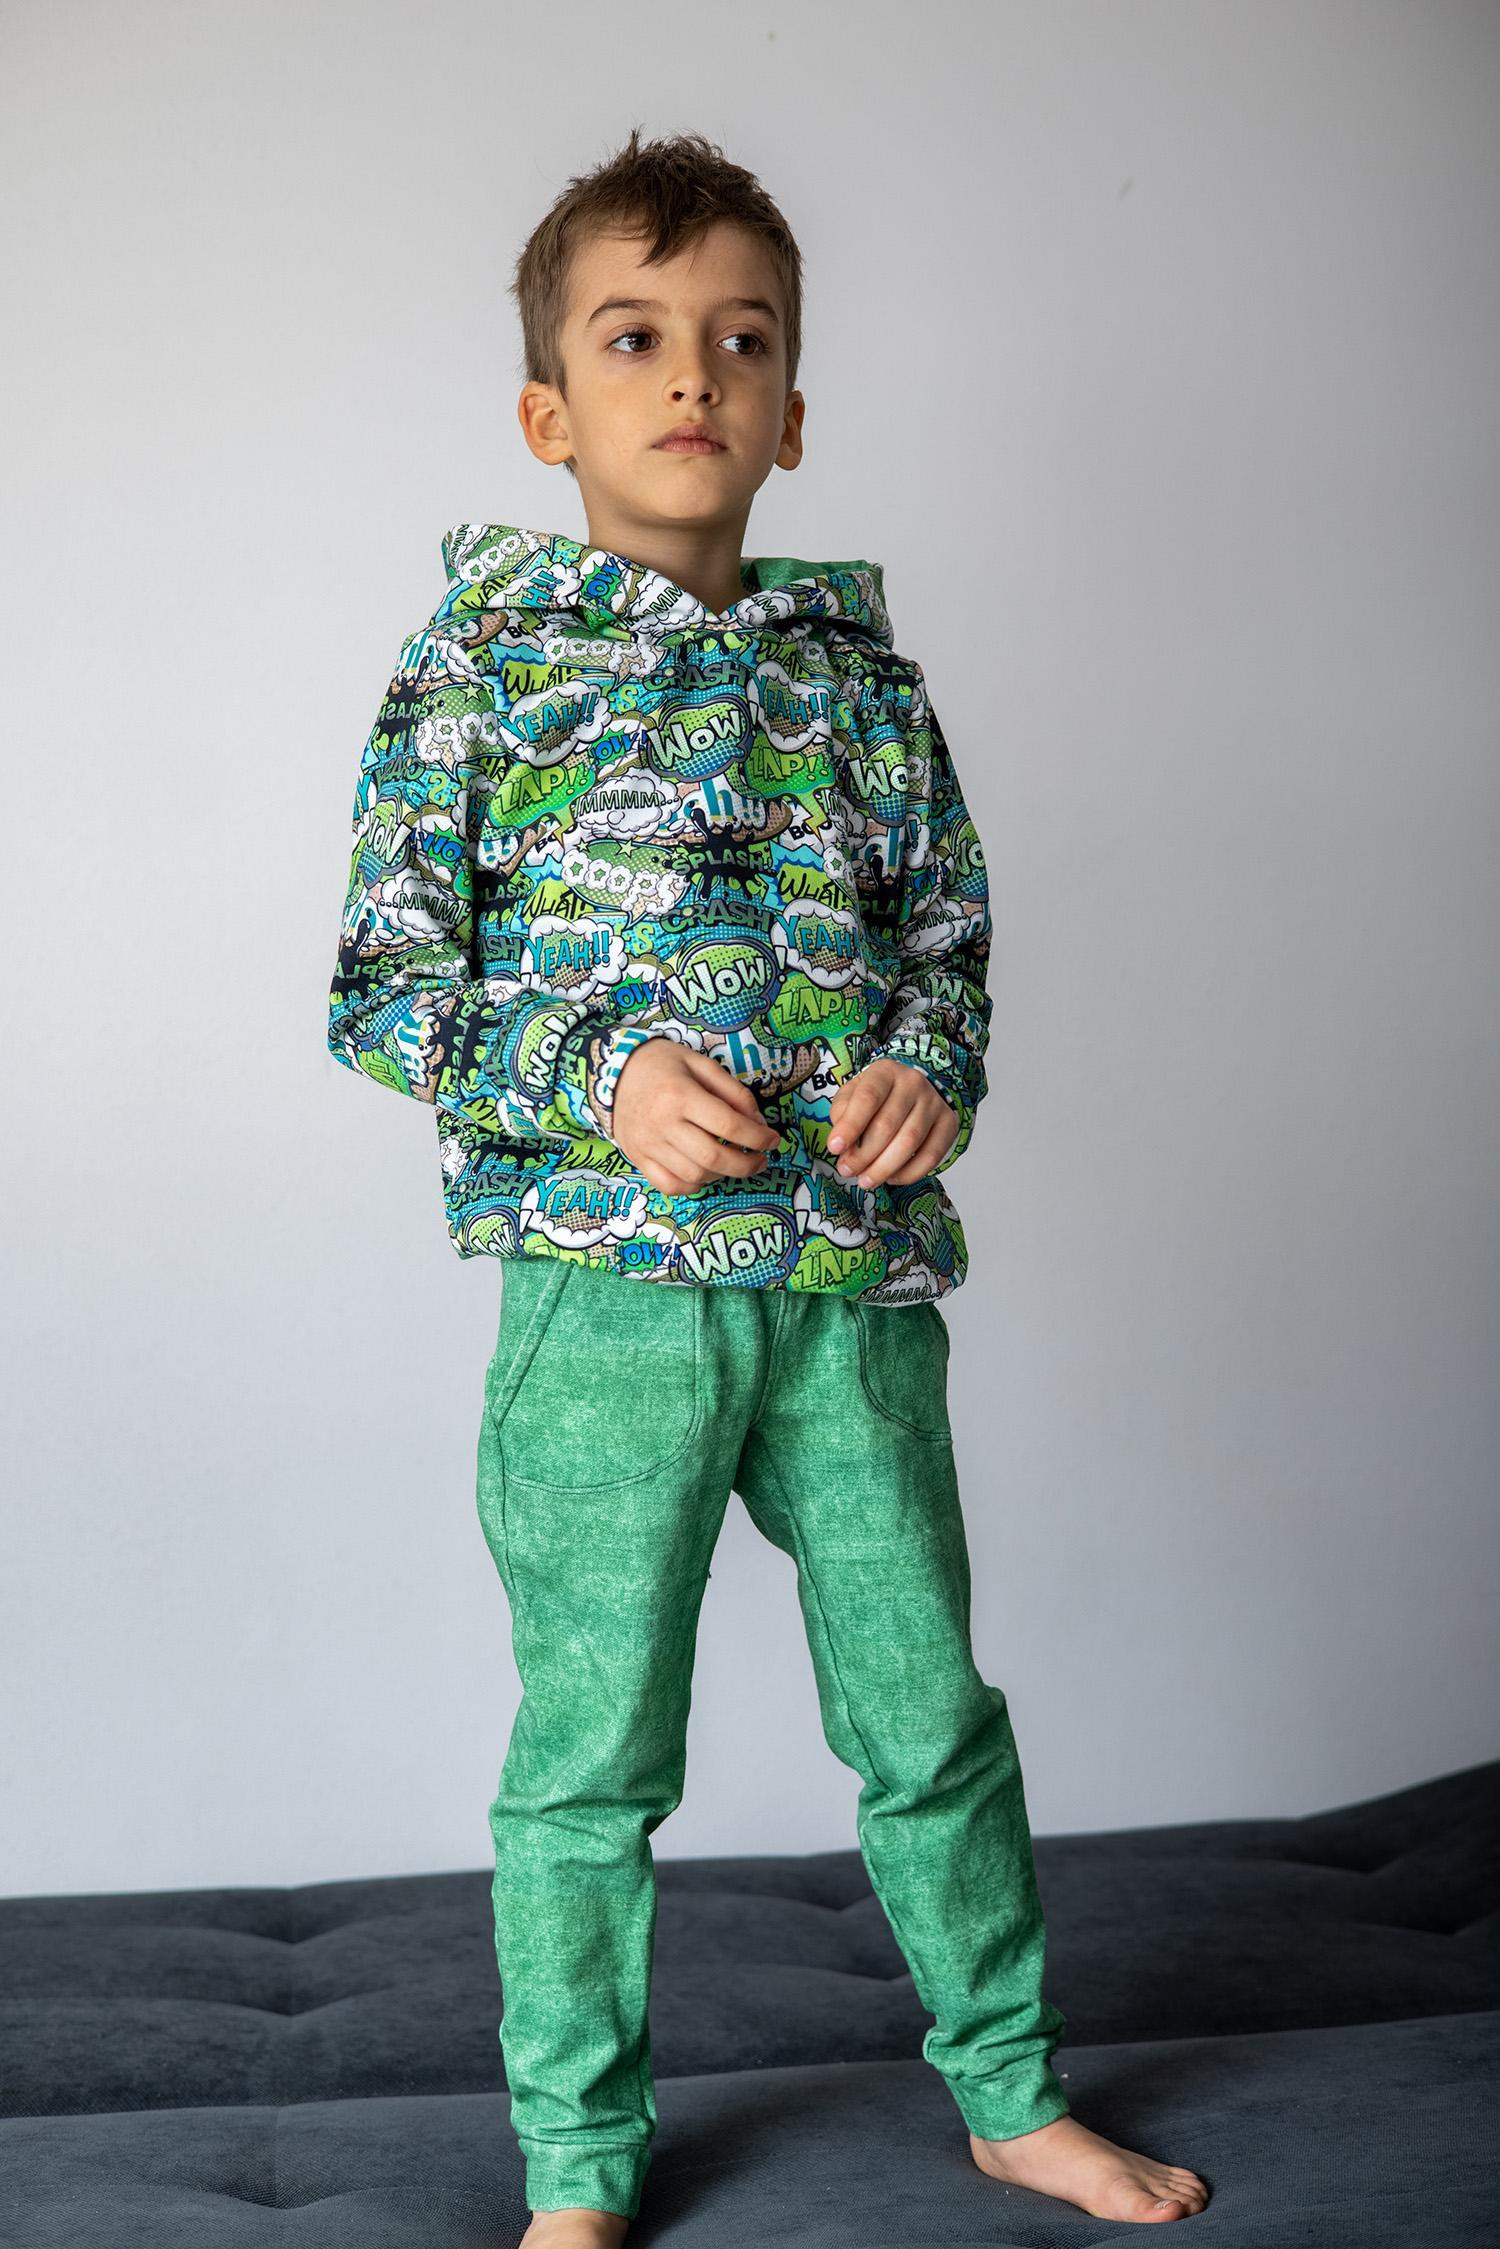 CHILDREN'S JOGGERS (LYON) - B-28 - POTTERS CLAY - looped knit fabric 